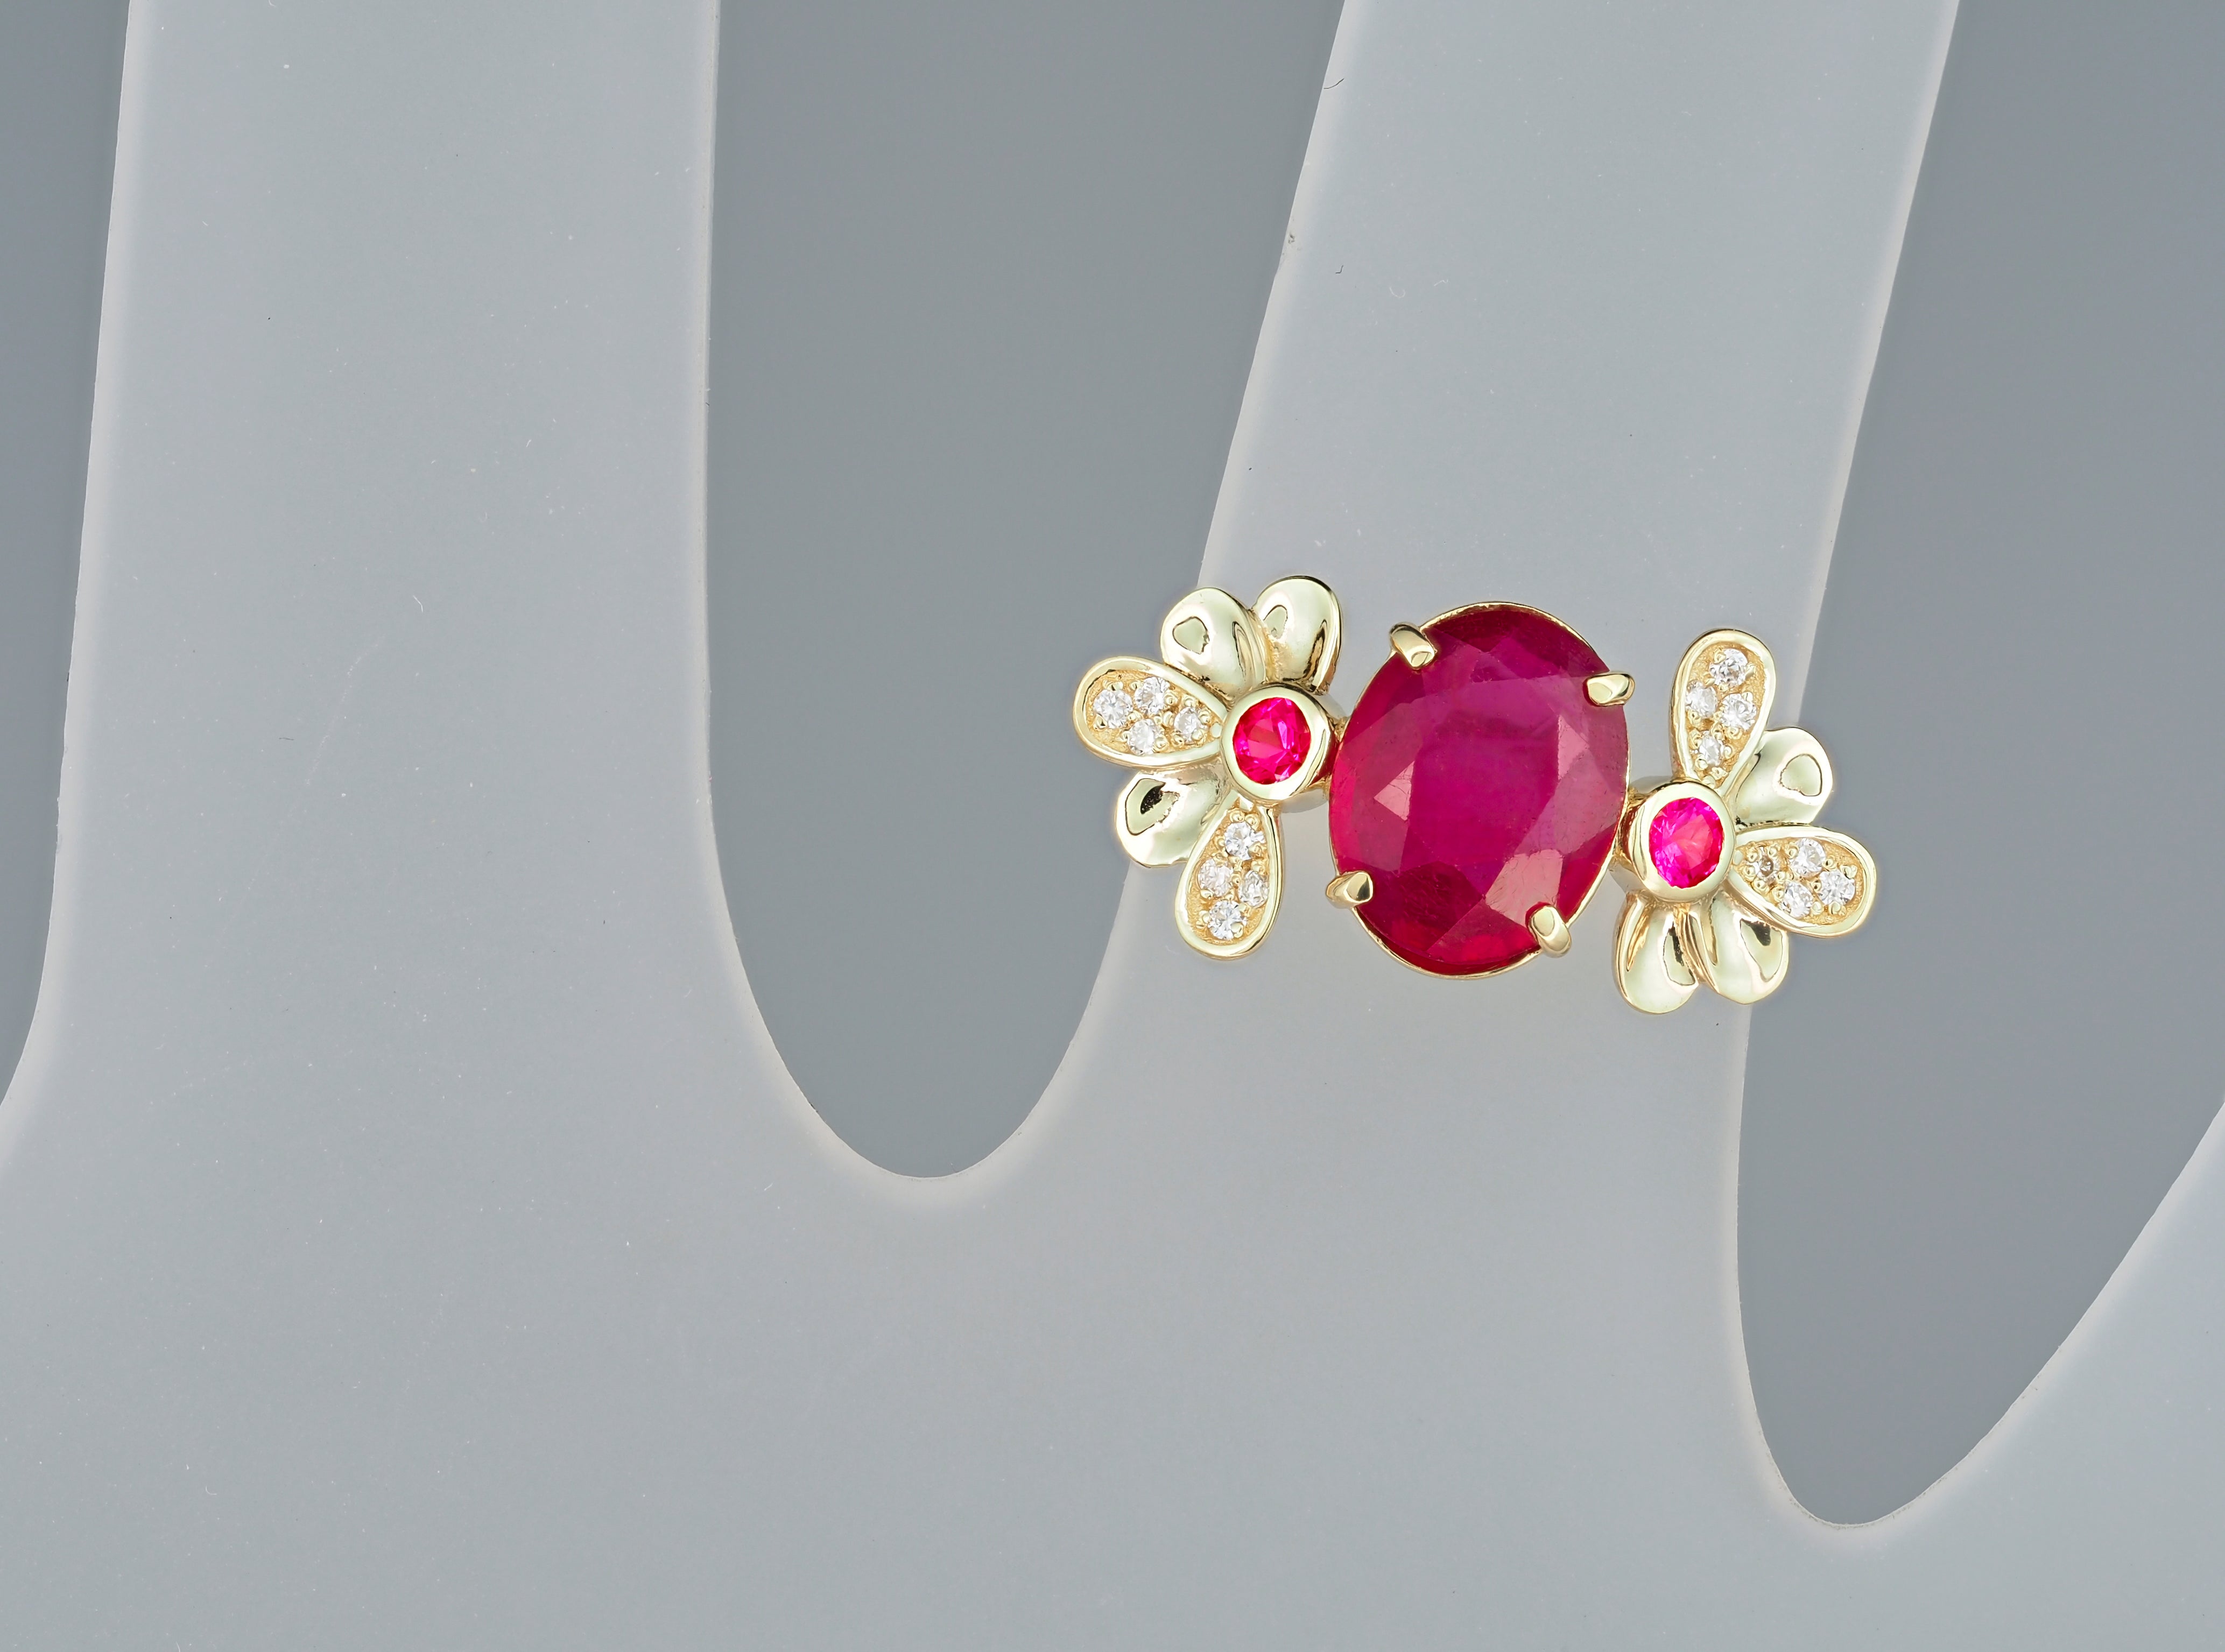 For Sale:  14 Karat Gold Ring with Ruby and Diamonds. Flower design ruby ring